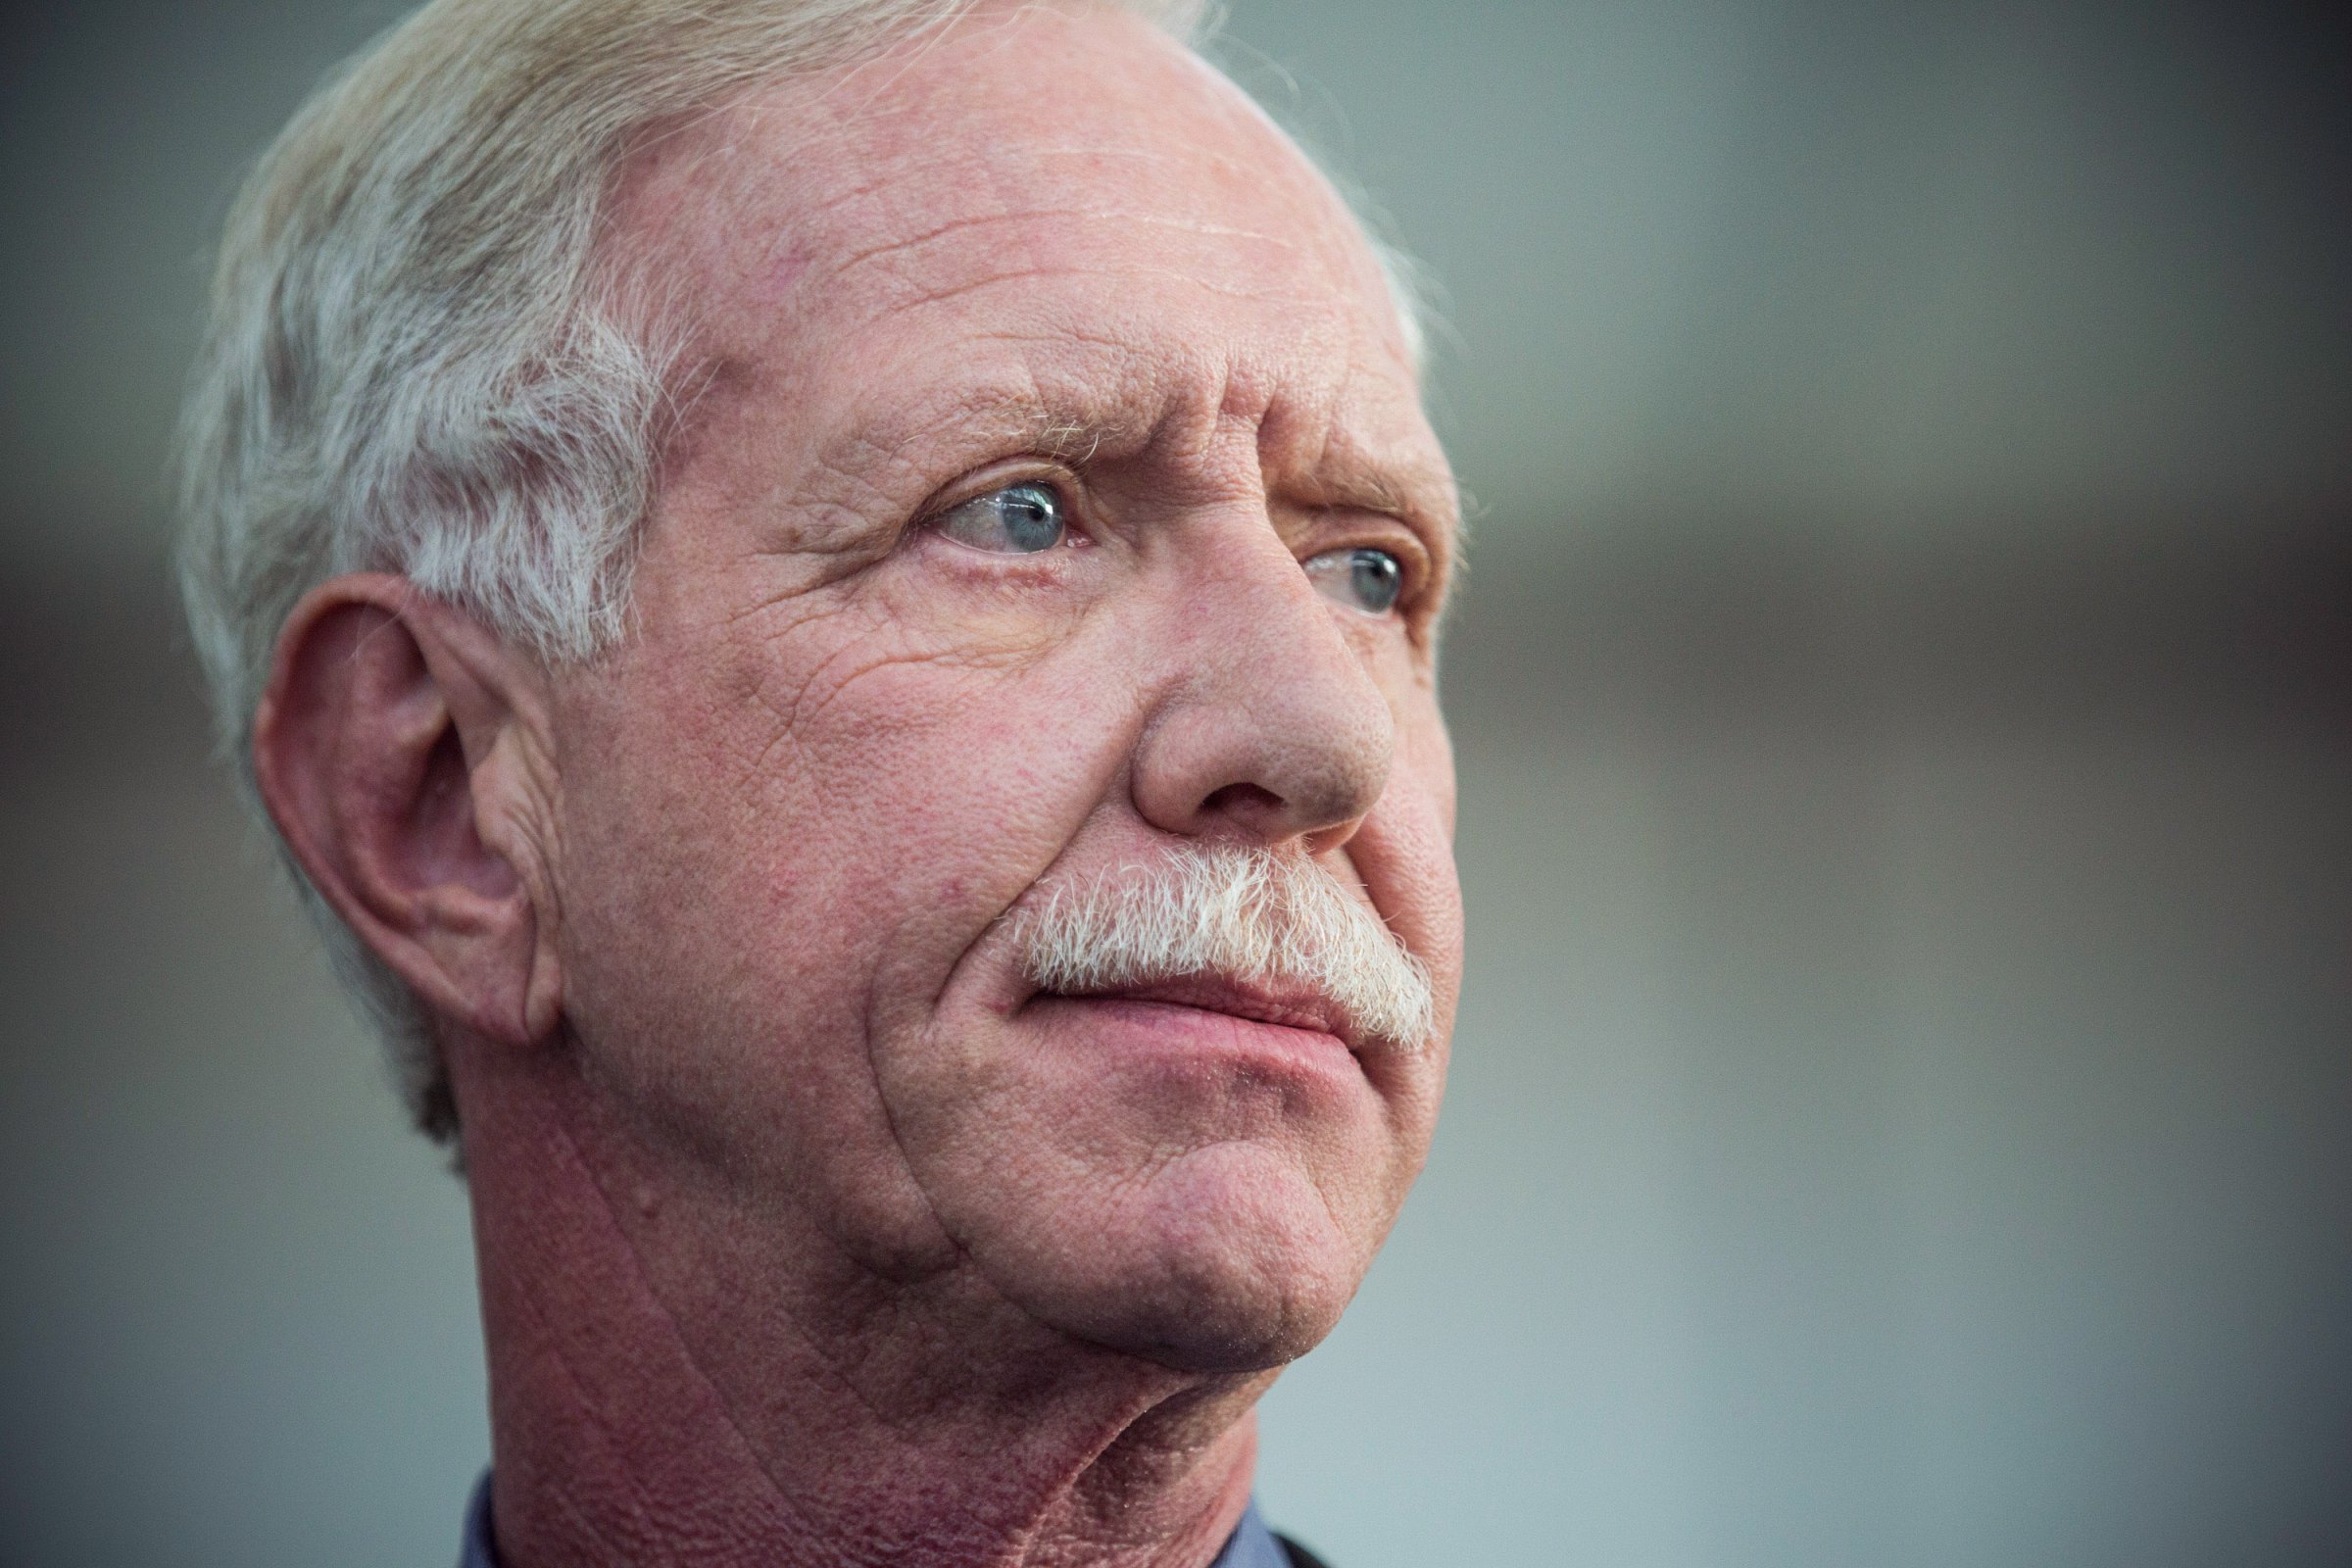 Chesley "Sully" Sullenberger in New York City, on Jan. 15, 2014.